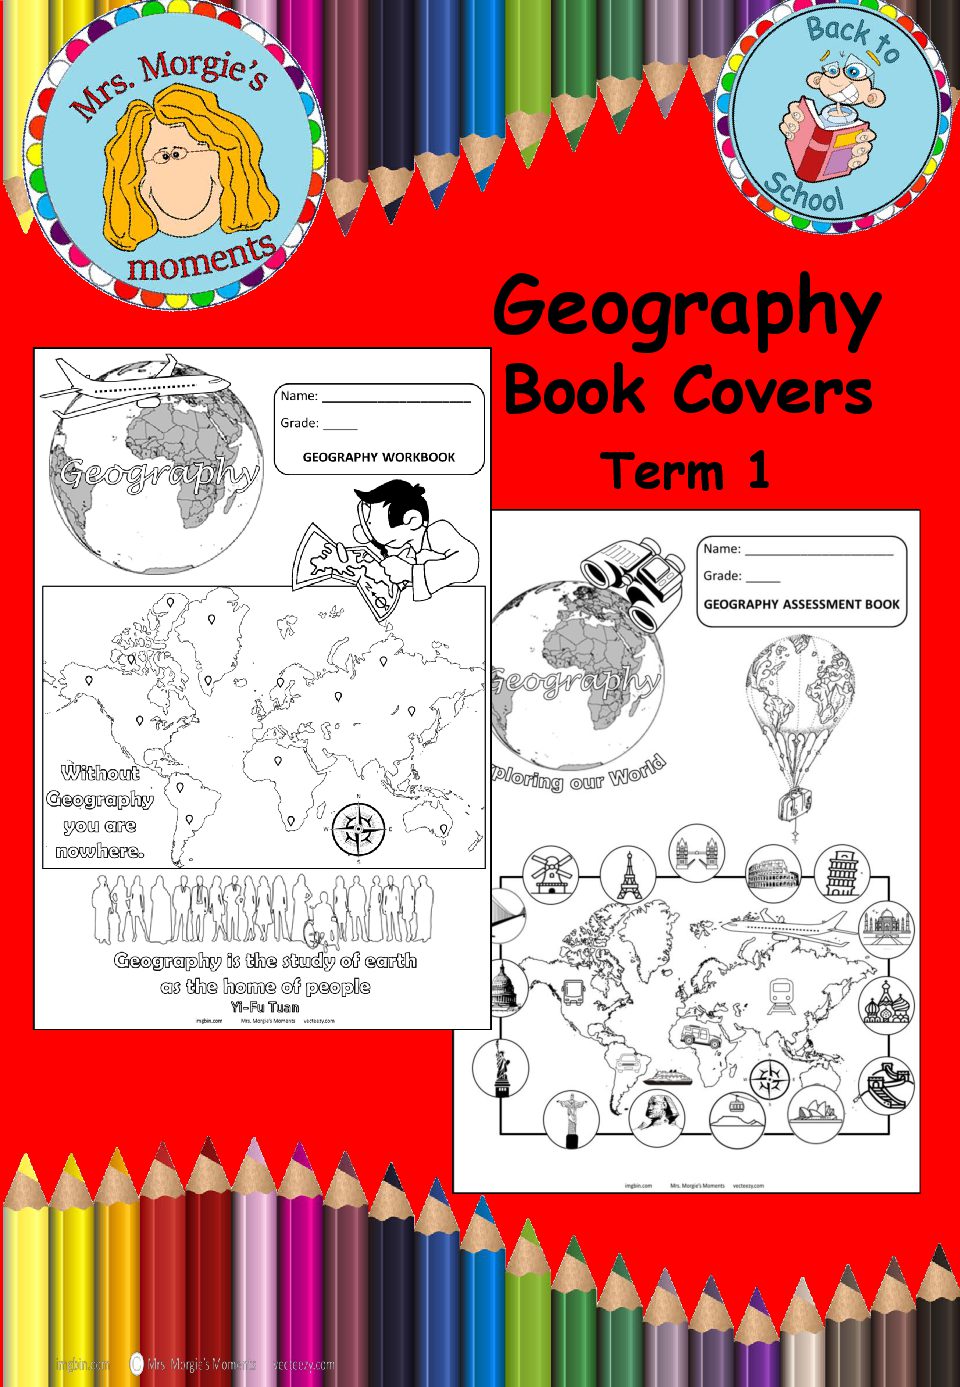 Geography covers cover • Teacha